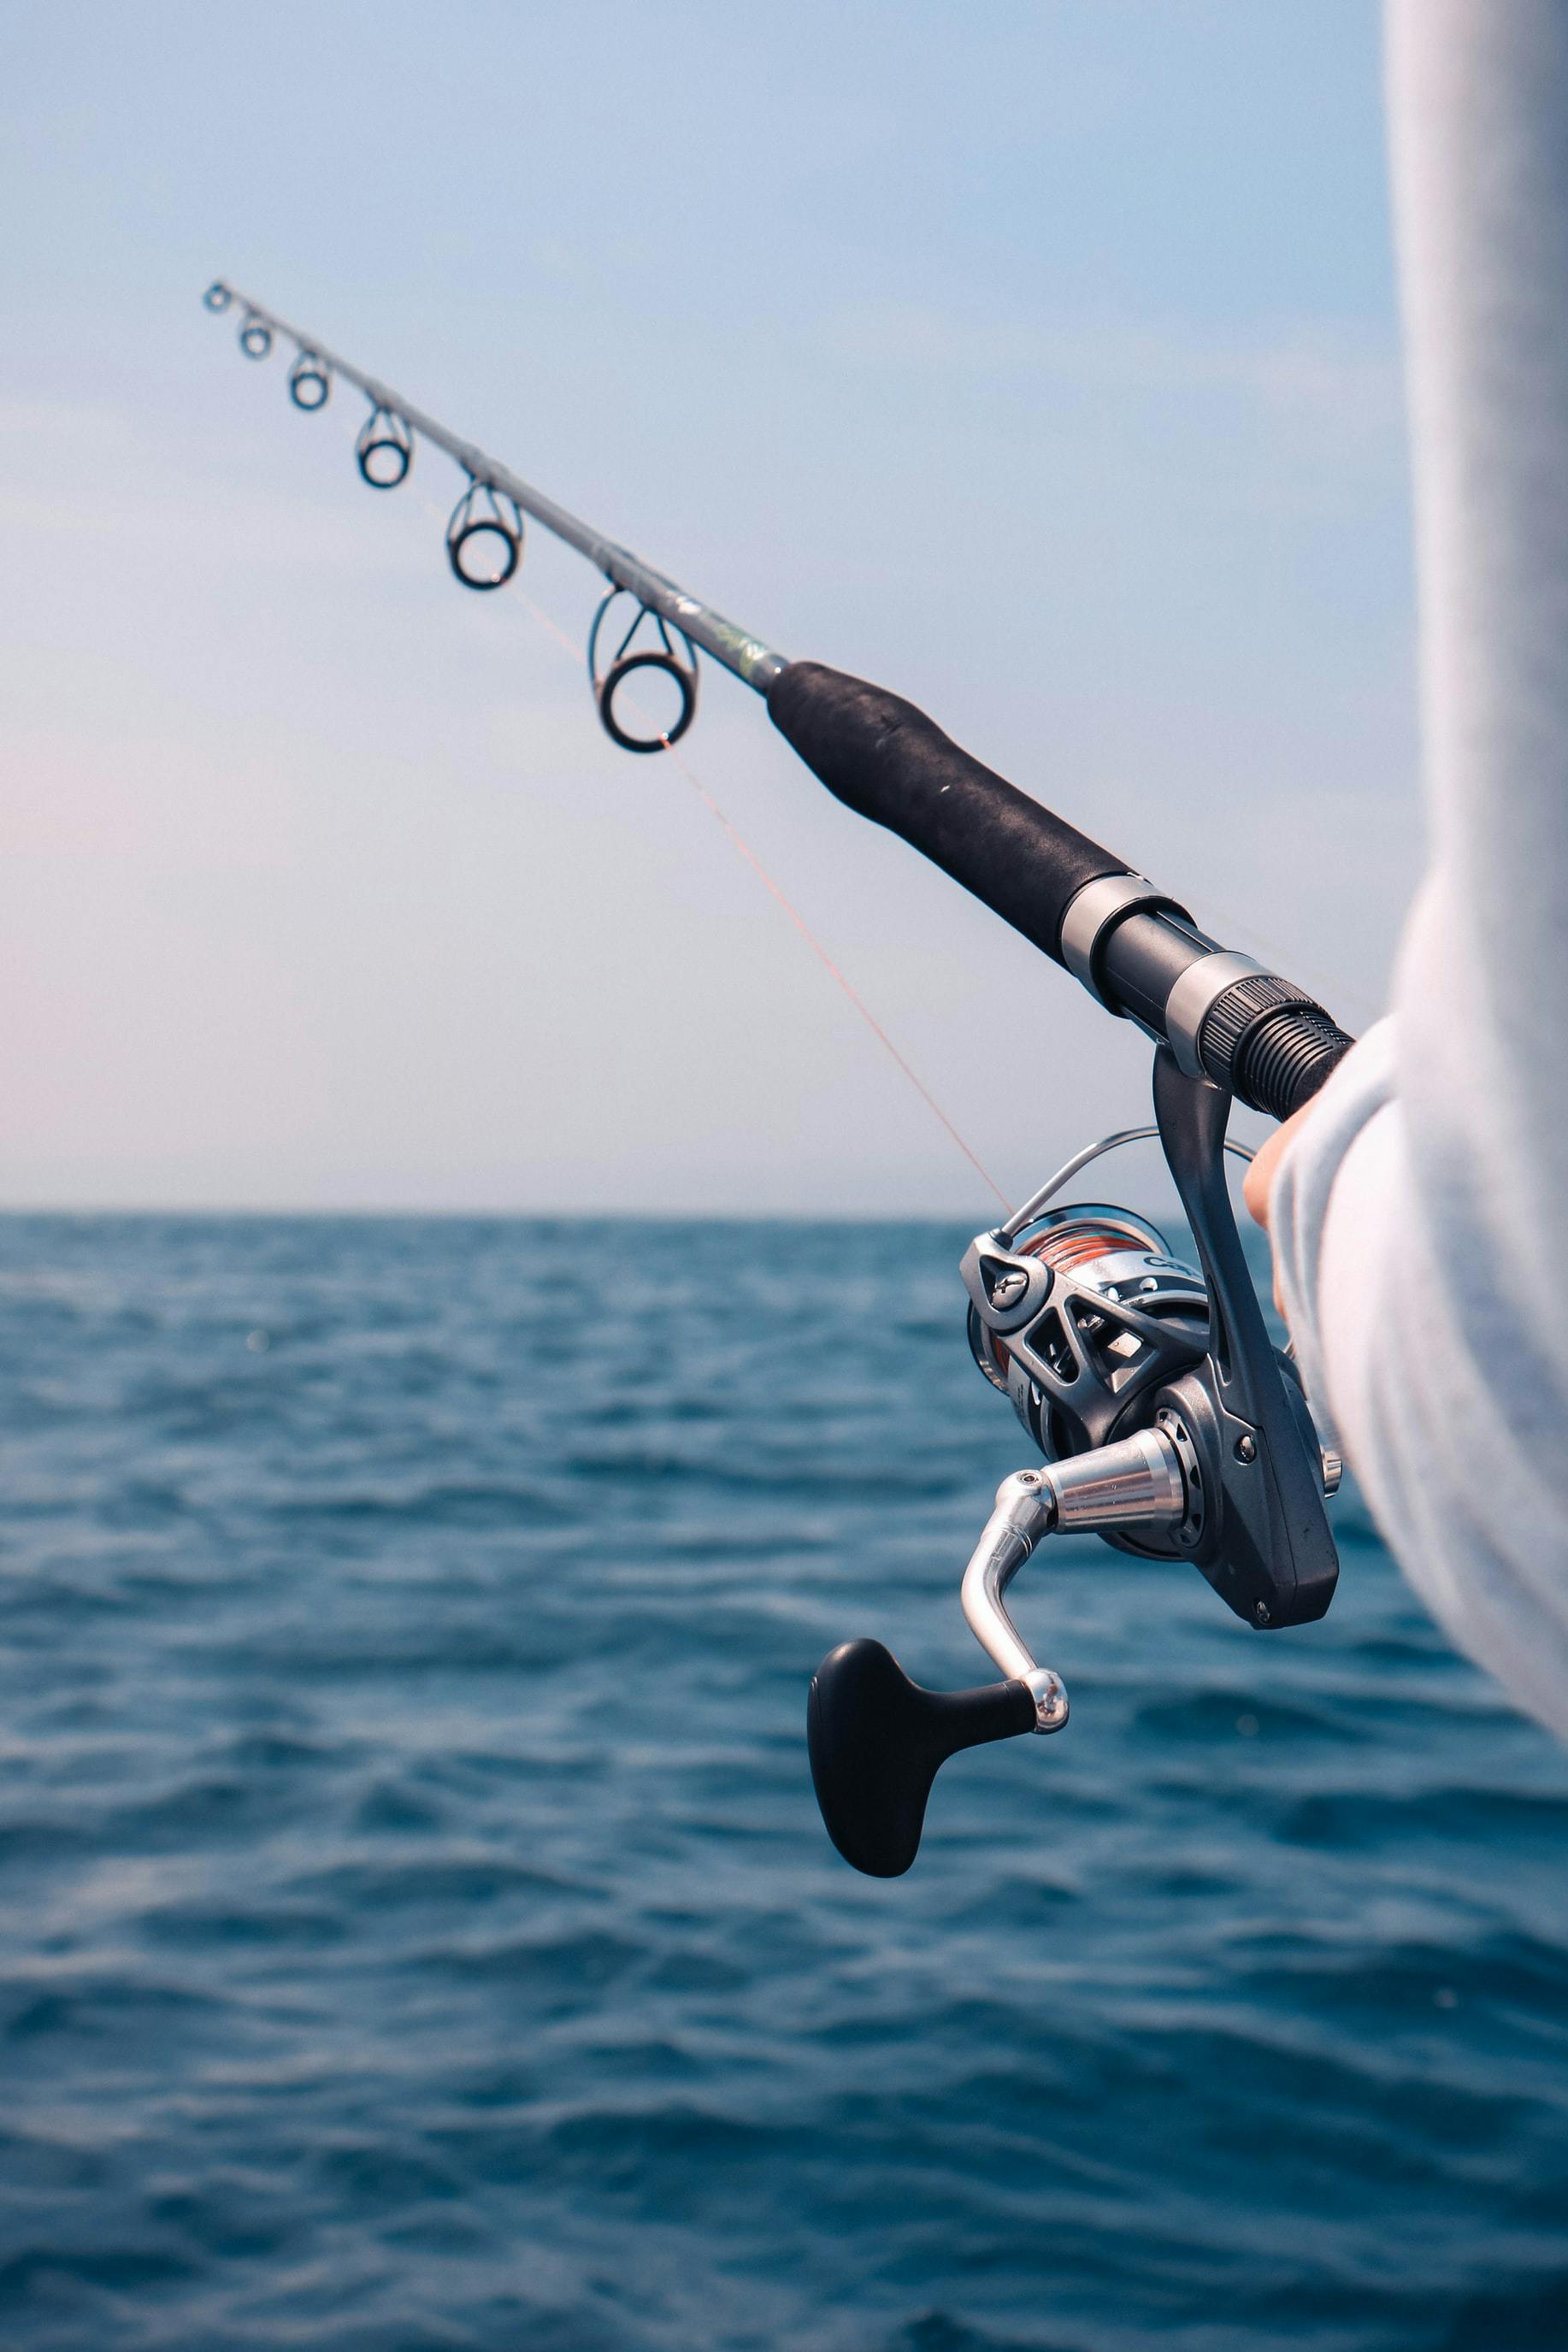 Closeup on a reel and rod being used for saltwater fishing